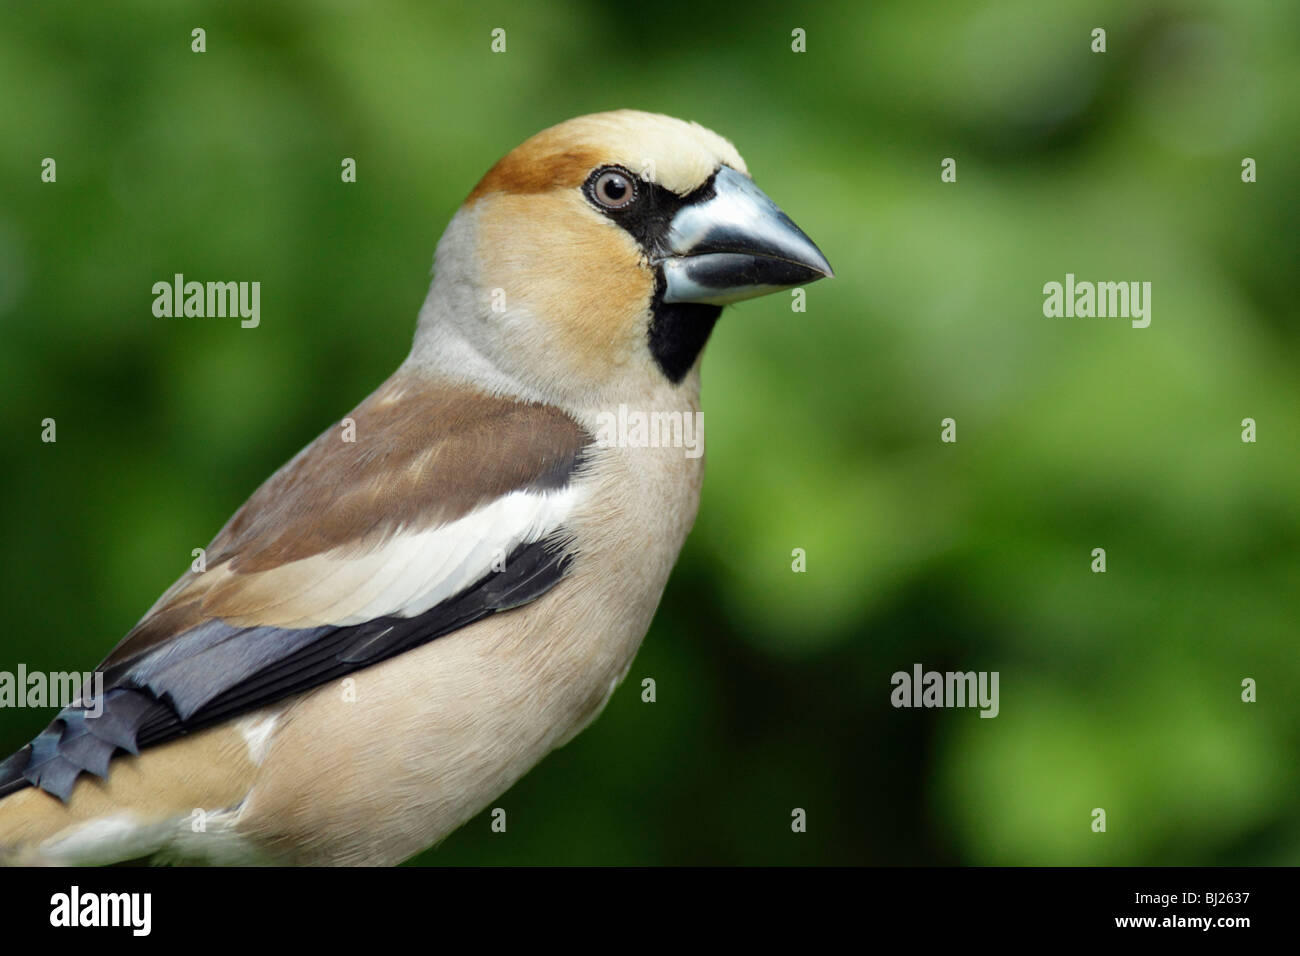 Hawfinch (Coccothraustes coccothraustes) portrait, Germany Stock Photo